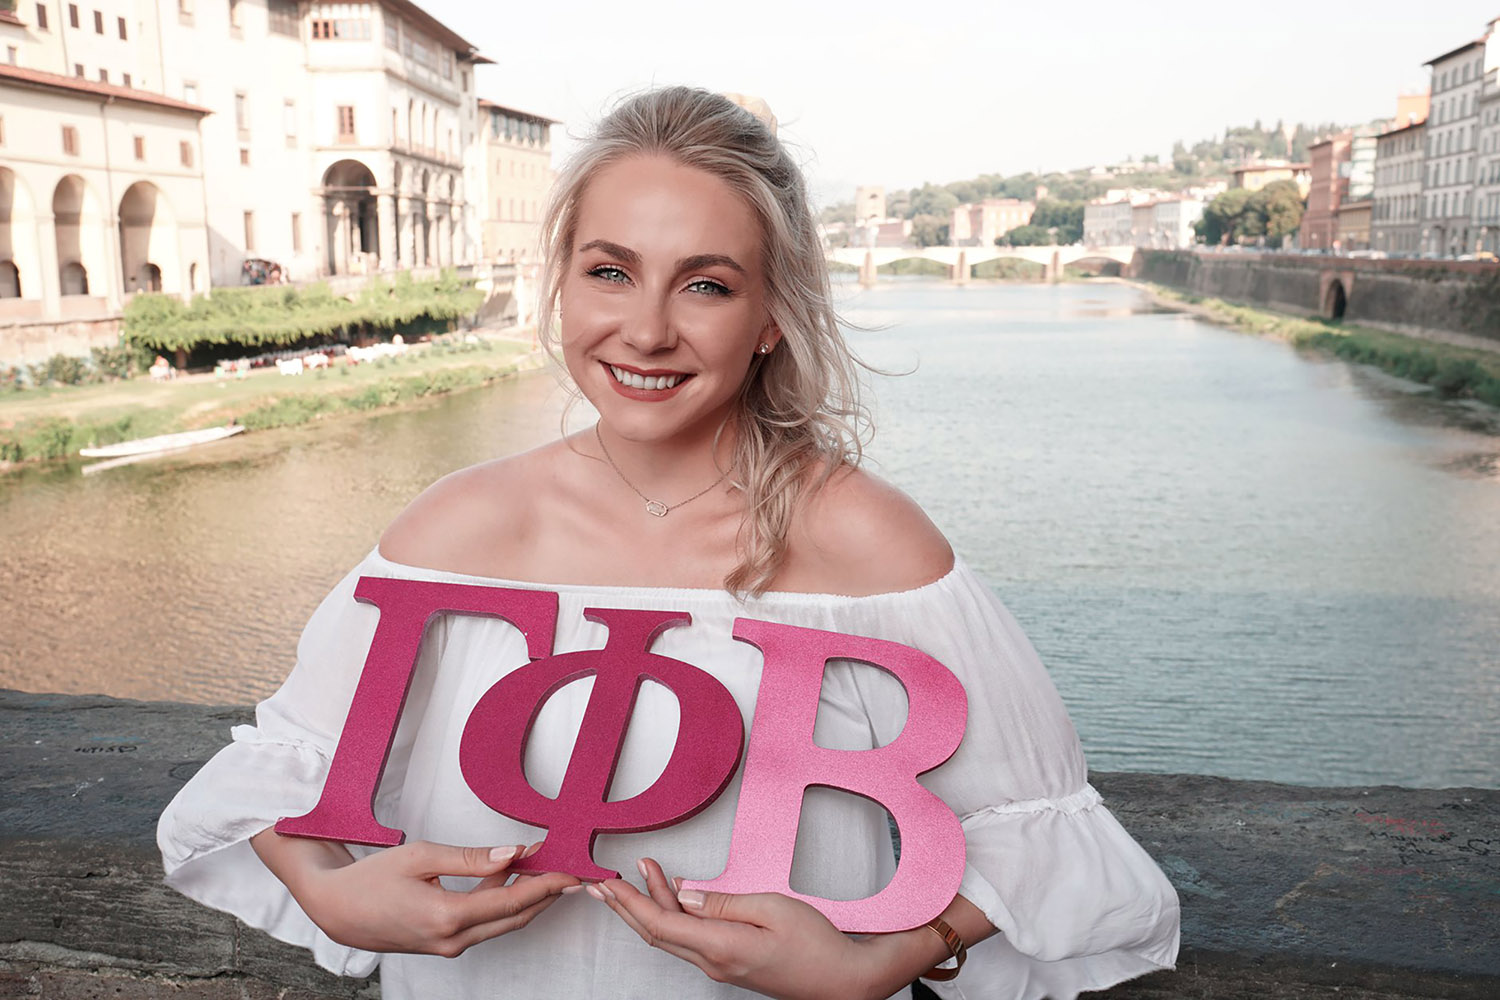 UNK senior Grace Magill poses for a photo in Florence, Italy, during a June 2019 trip sponsored by Select Study Abroad and the Gamma Phi Beta international sorority. (Courtesy photos)